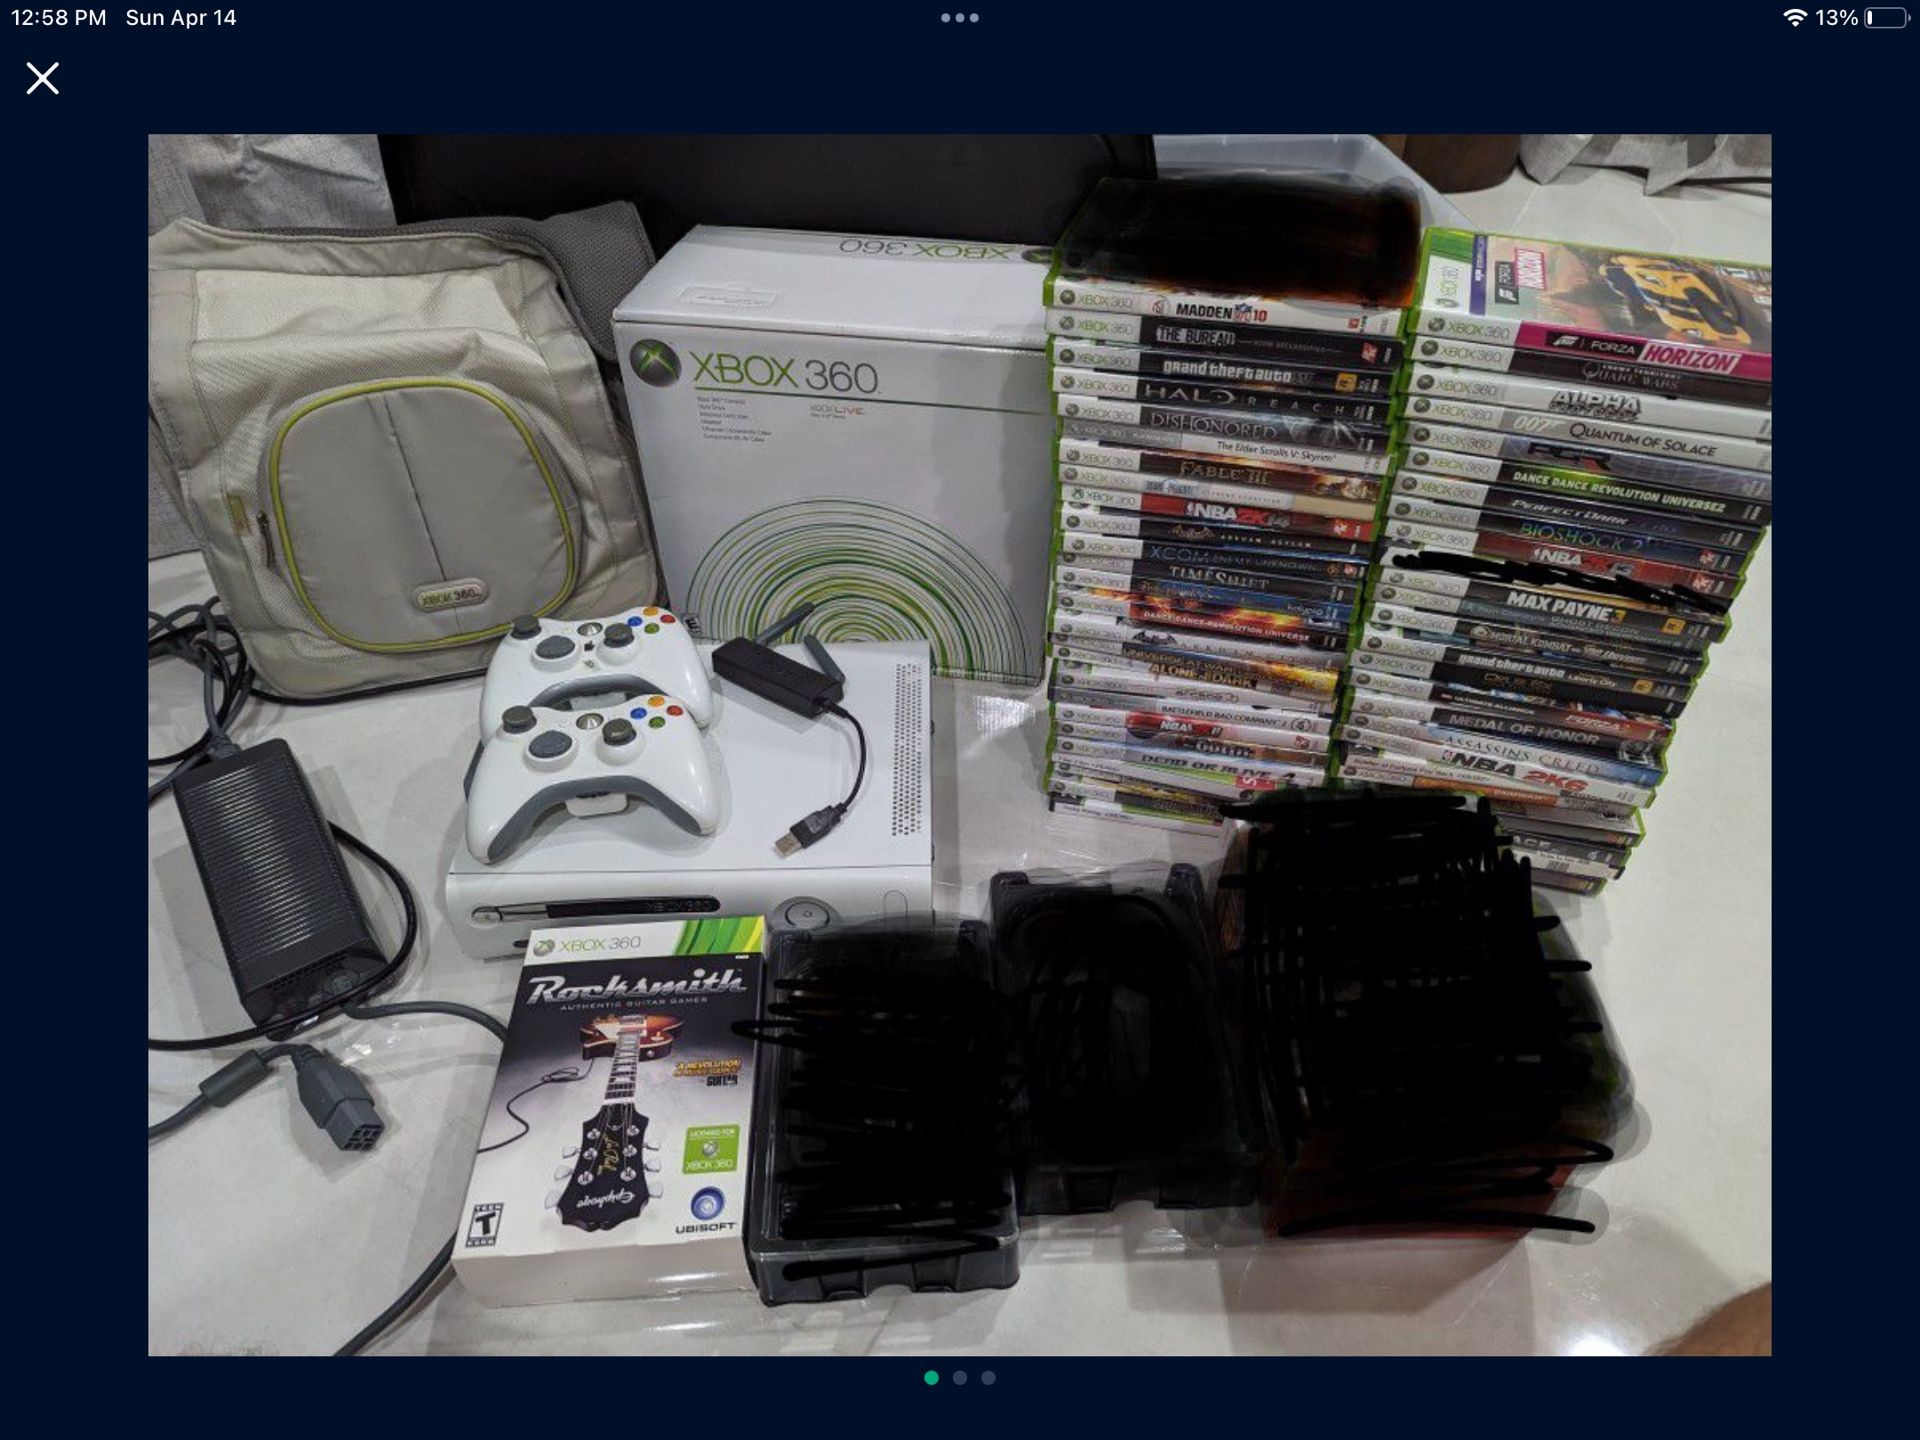 Xbox 360 Over 50 Games Original Box, Messenger Bag, Plus More Huge lot of Xbox 360 video games system. Works great 